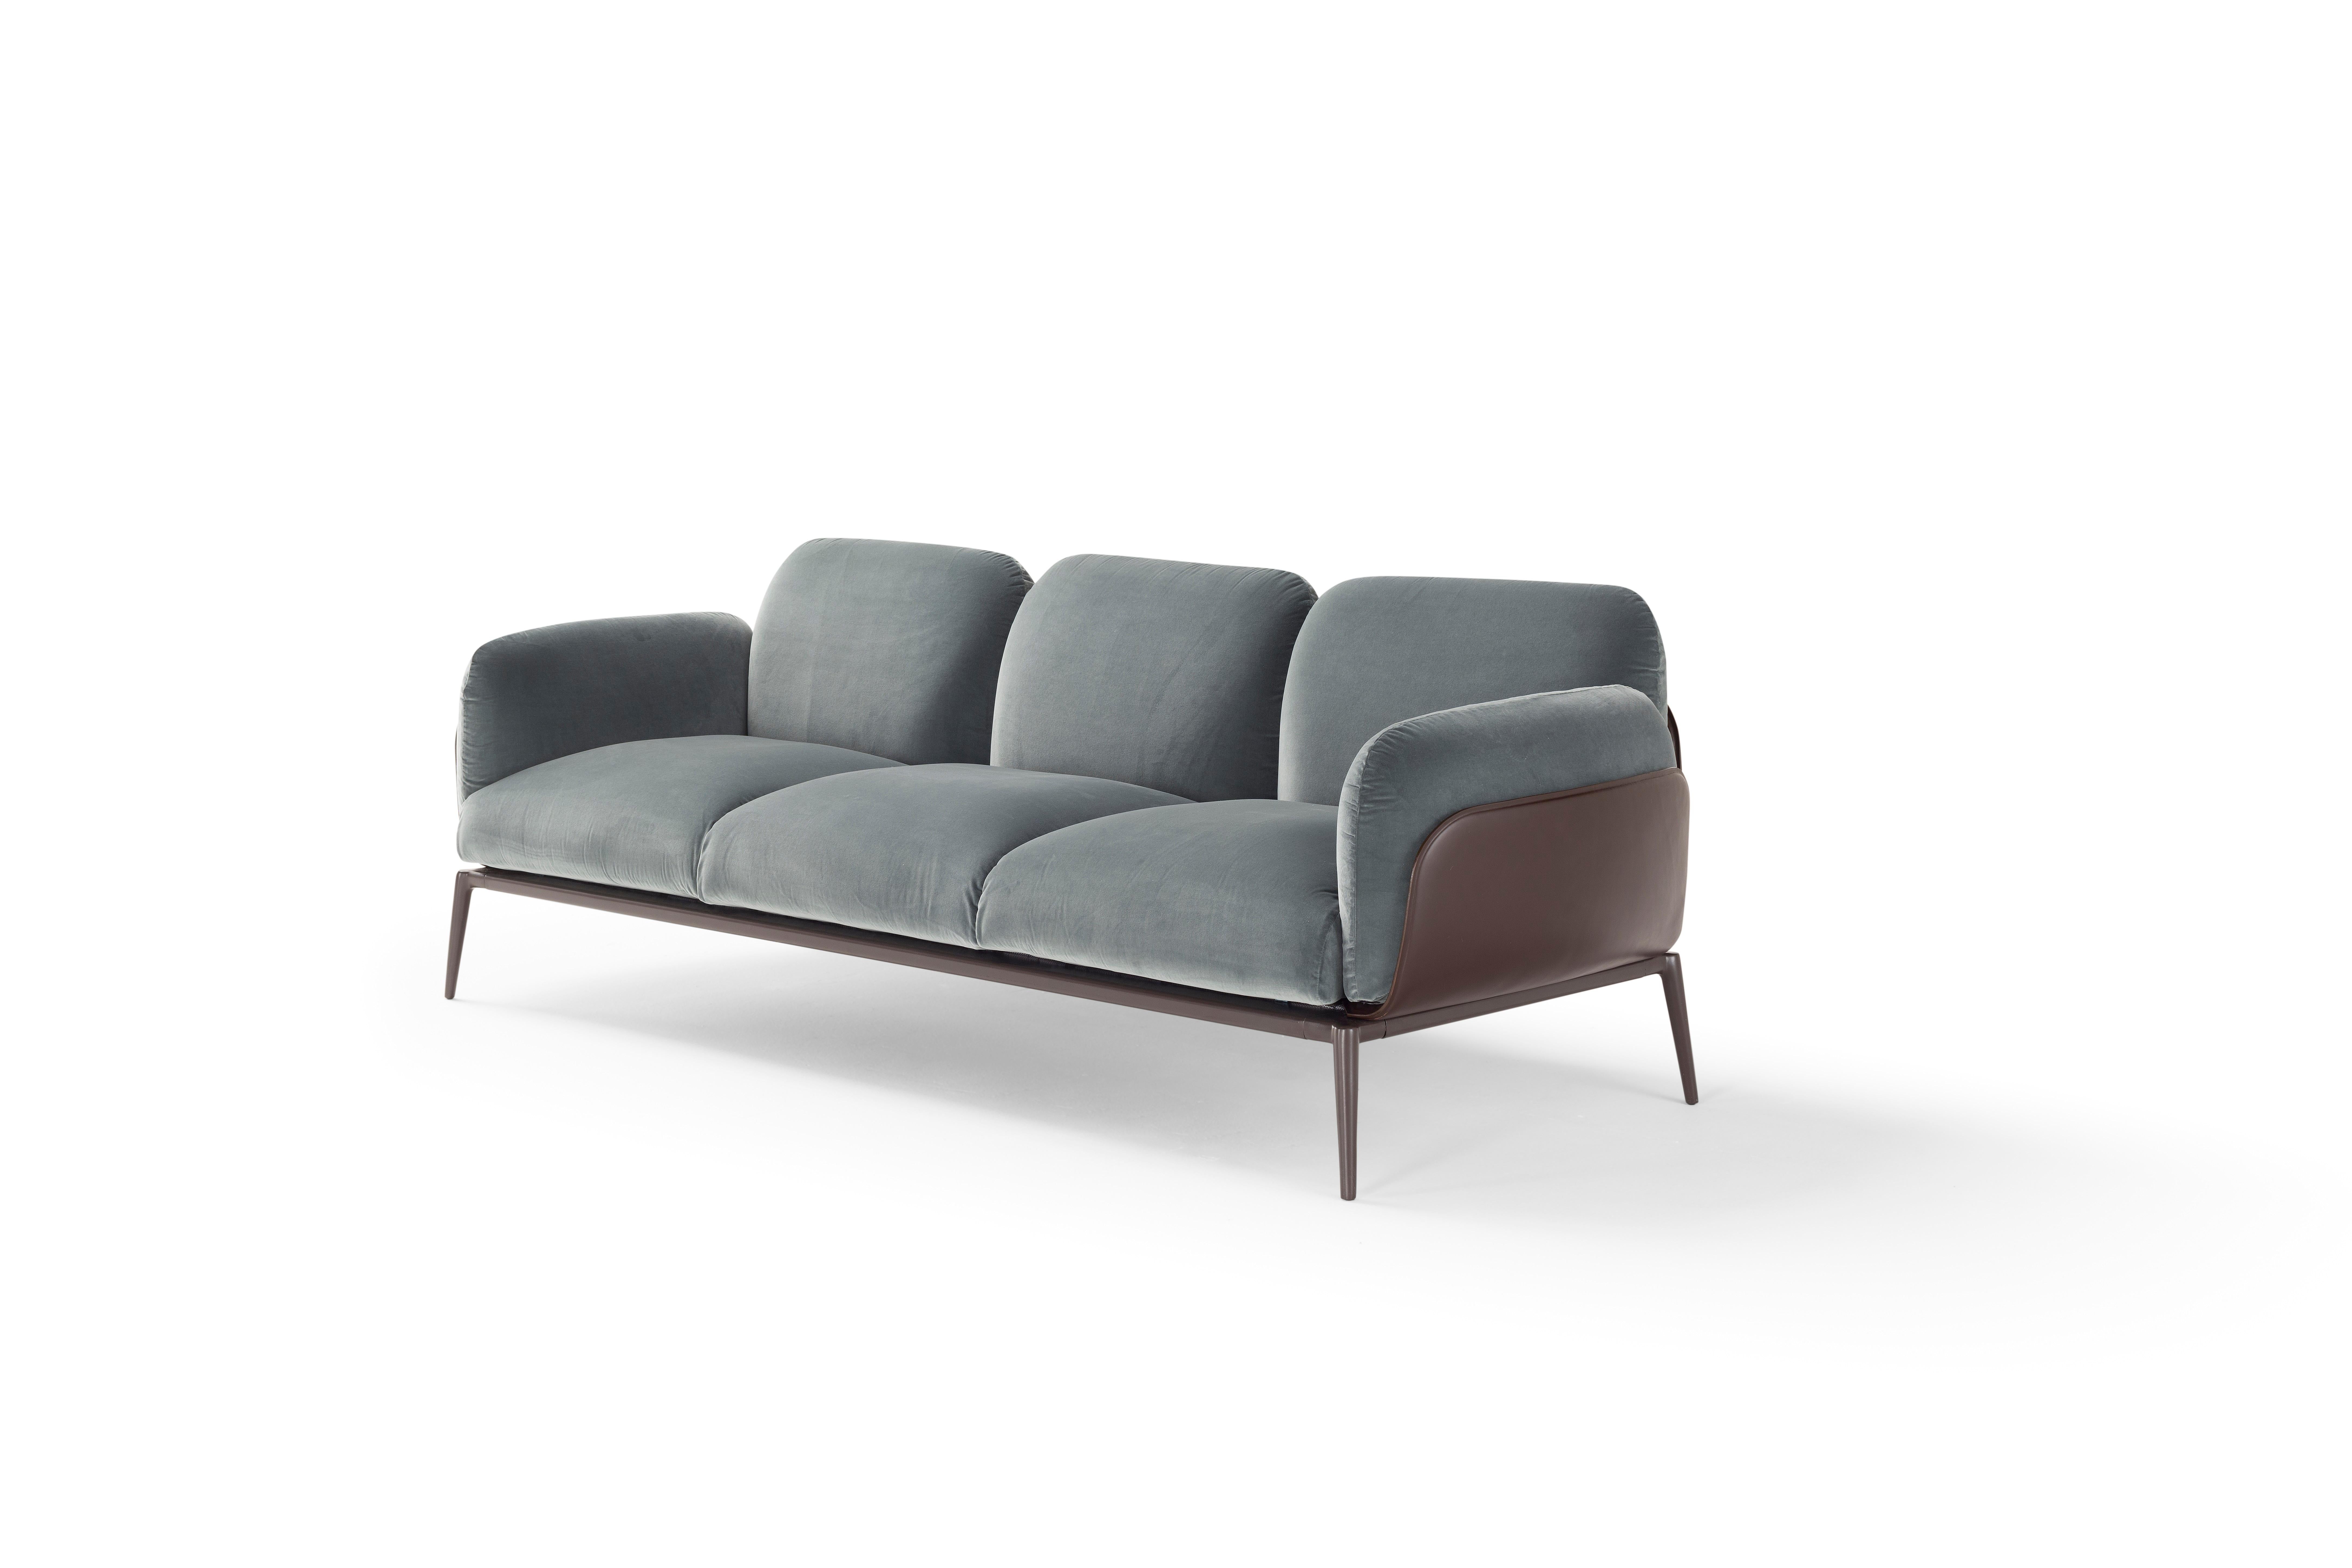 The Brooklyn Sofa takes its inspiration from the New York neighbourhood of Brooklyn: a hotpot of trends springing from diverse styles. With its strong personality, the Brooklyn Sofa is born from the intersection of extremely innovative materials in